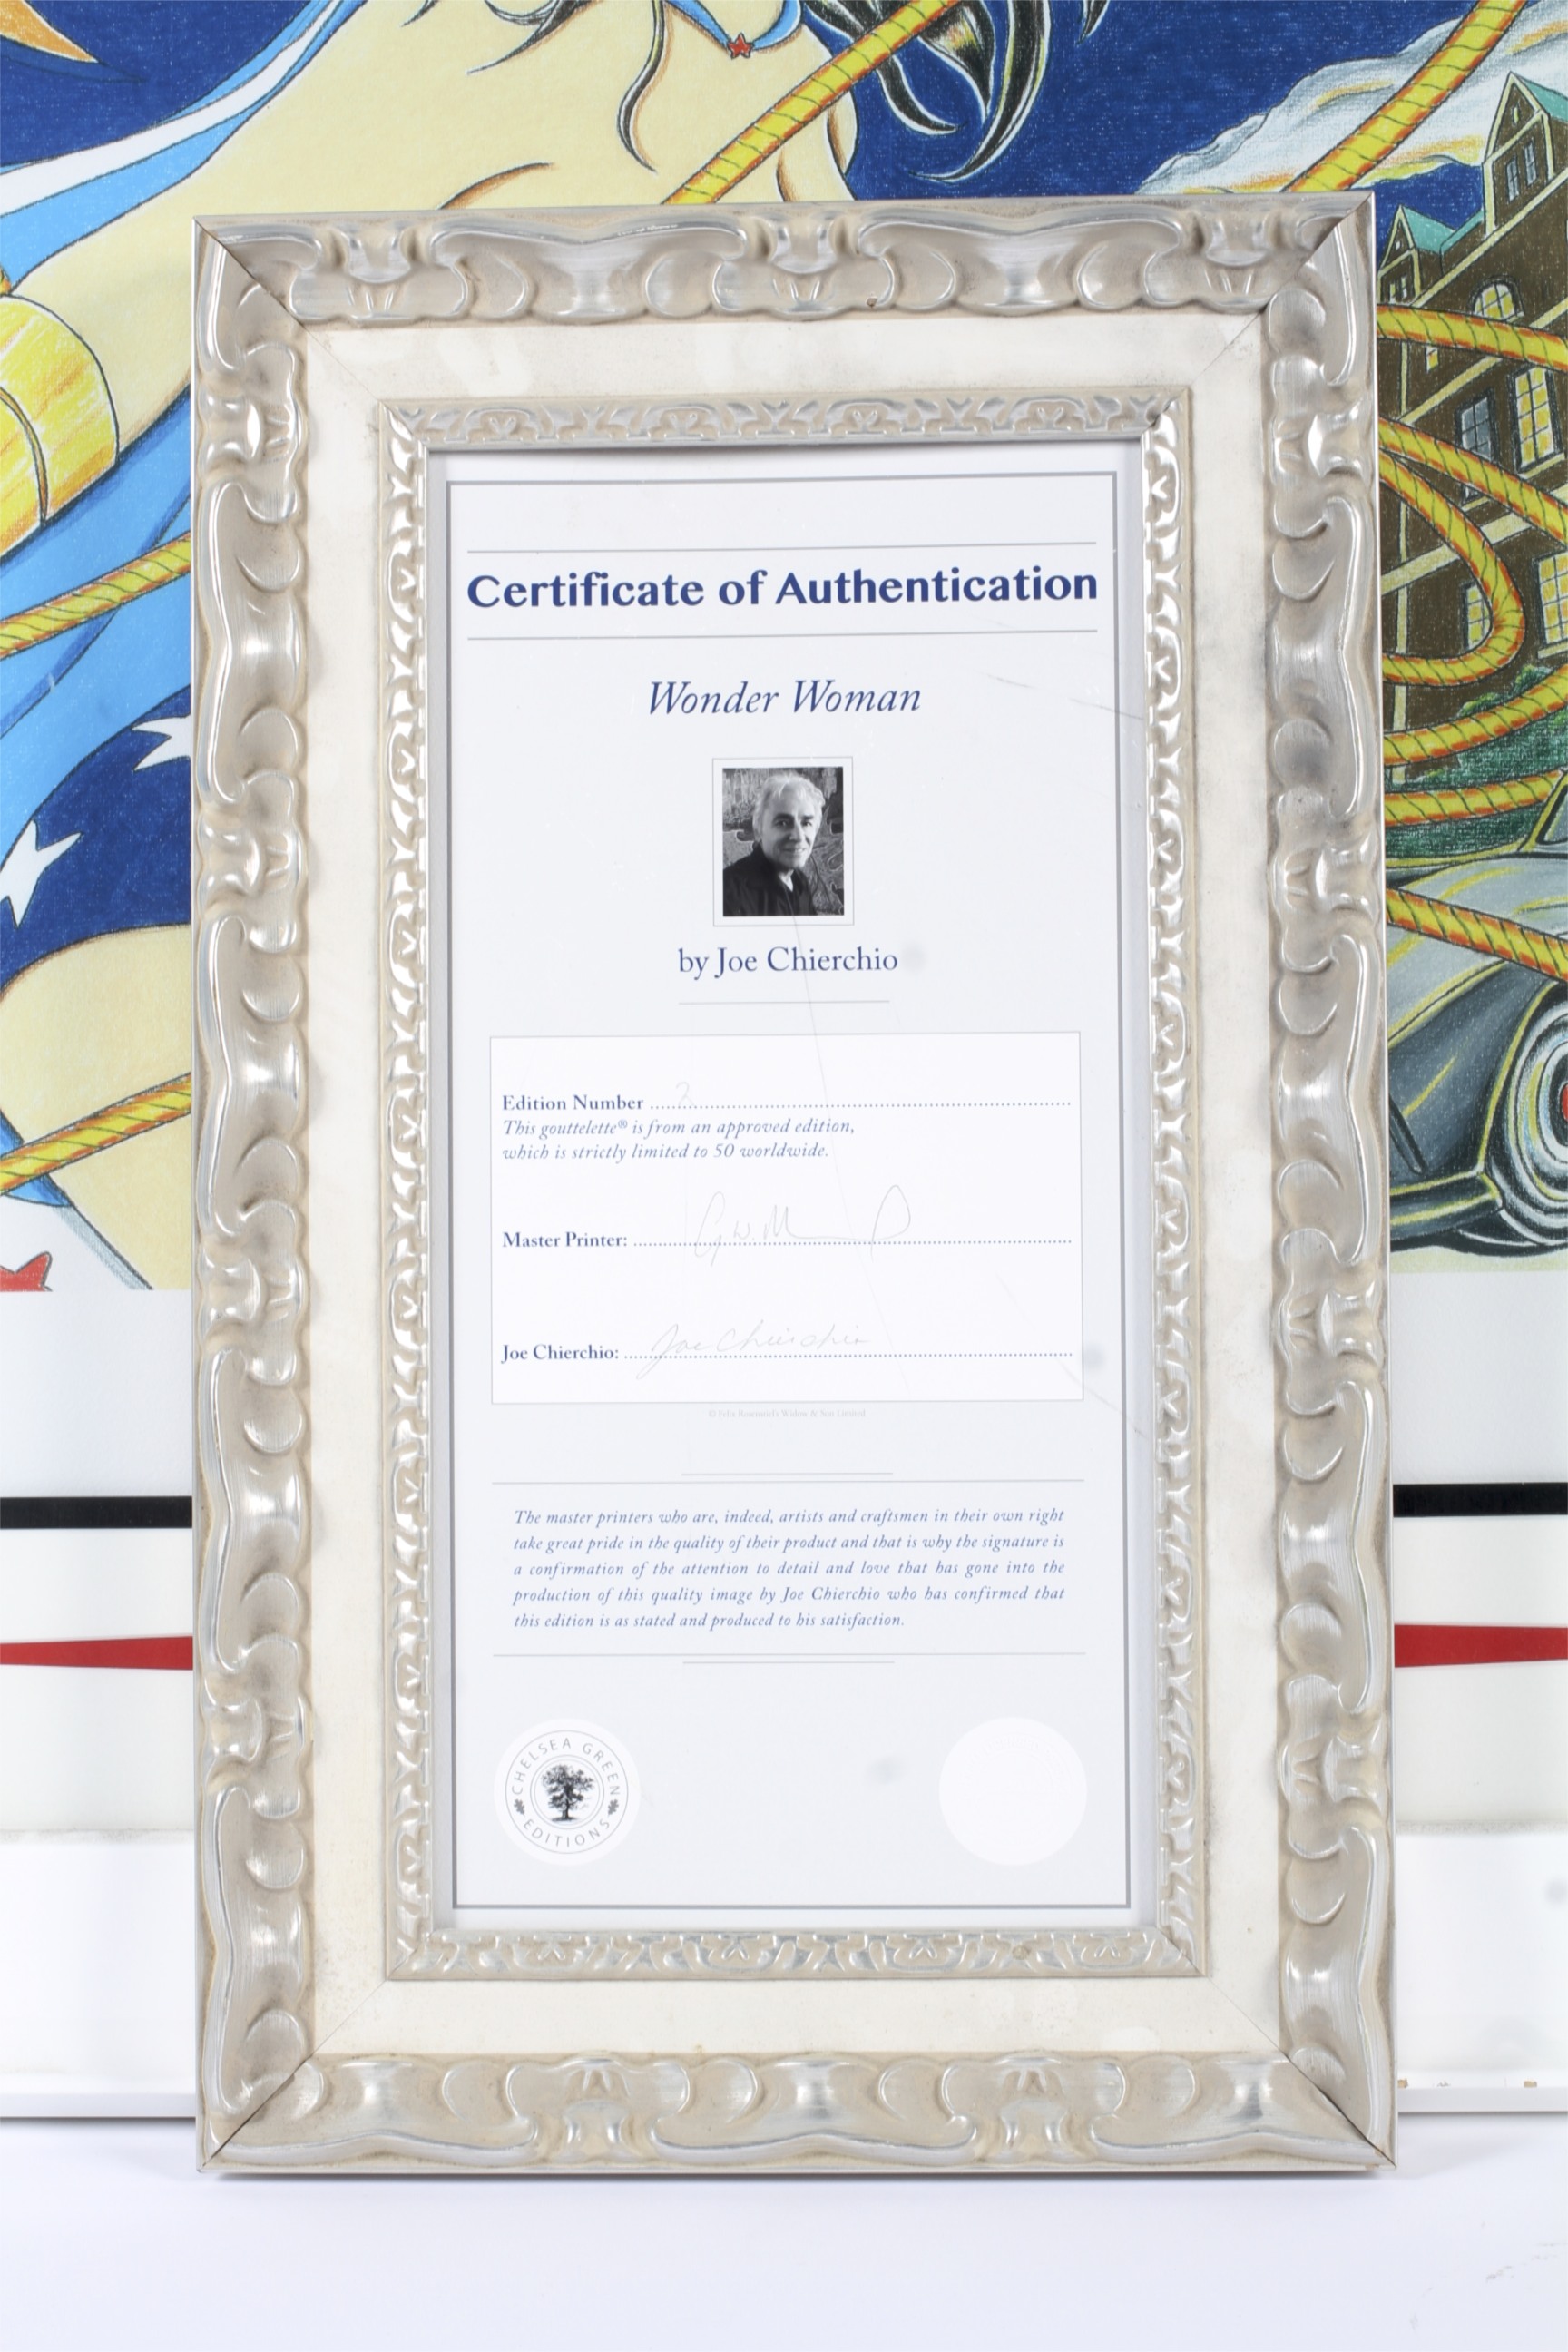 A limited edition framed Wonder Woman print and certificate by Joe Chierchio. - Image 3 of 3